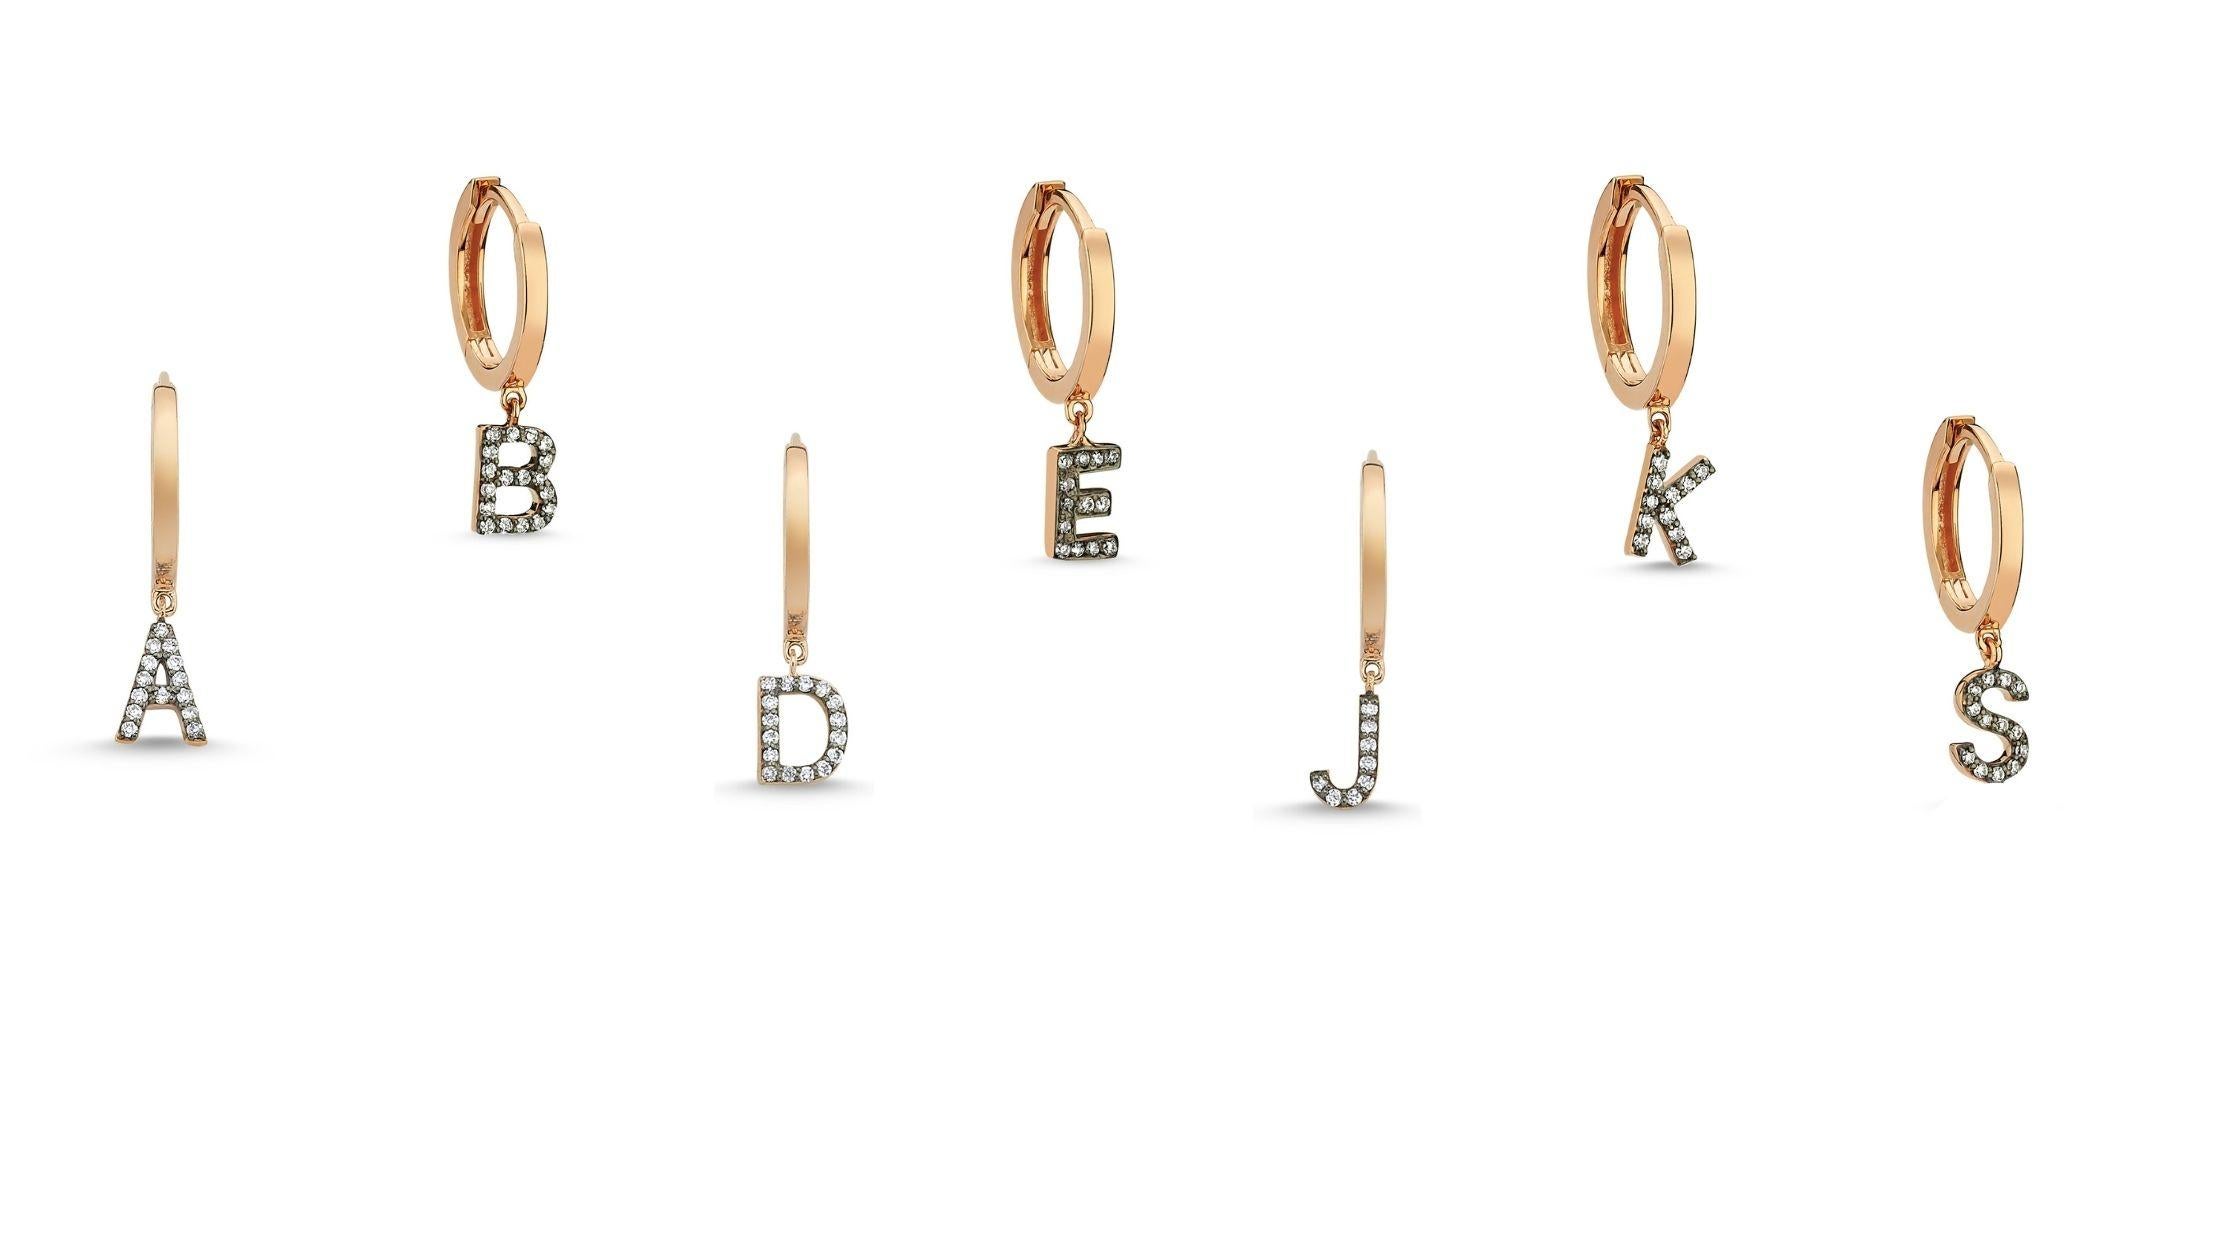 Letter E (single) 14k rose gold earring with white diamond by Selda Jewellery

Additional Information:-
Collection: Letter Collection
14k Rose gold
0.04ct White diamond
Letter height 1cm